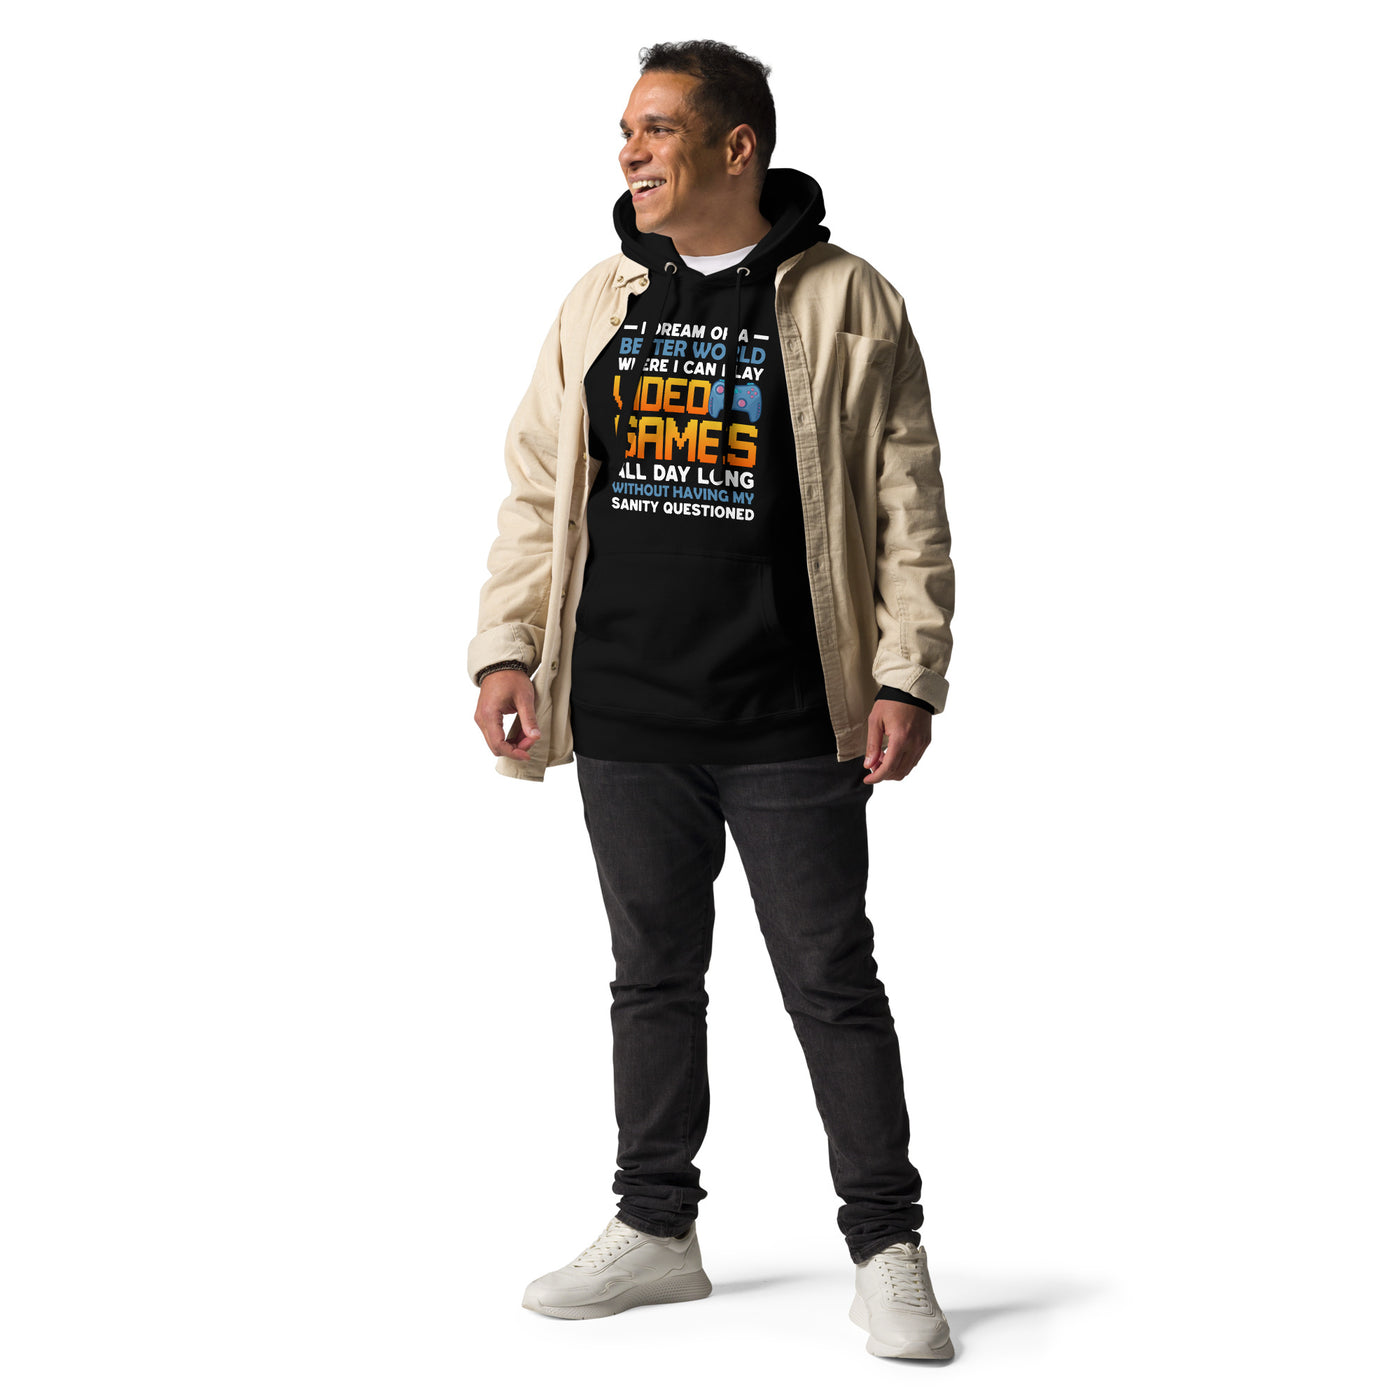 I Dream of a Better World where I can Play Video Games - Unisex Hoodie